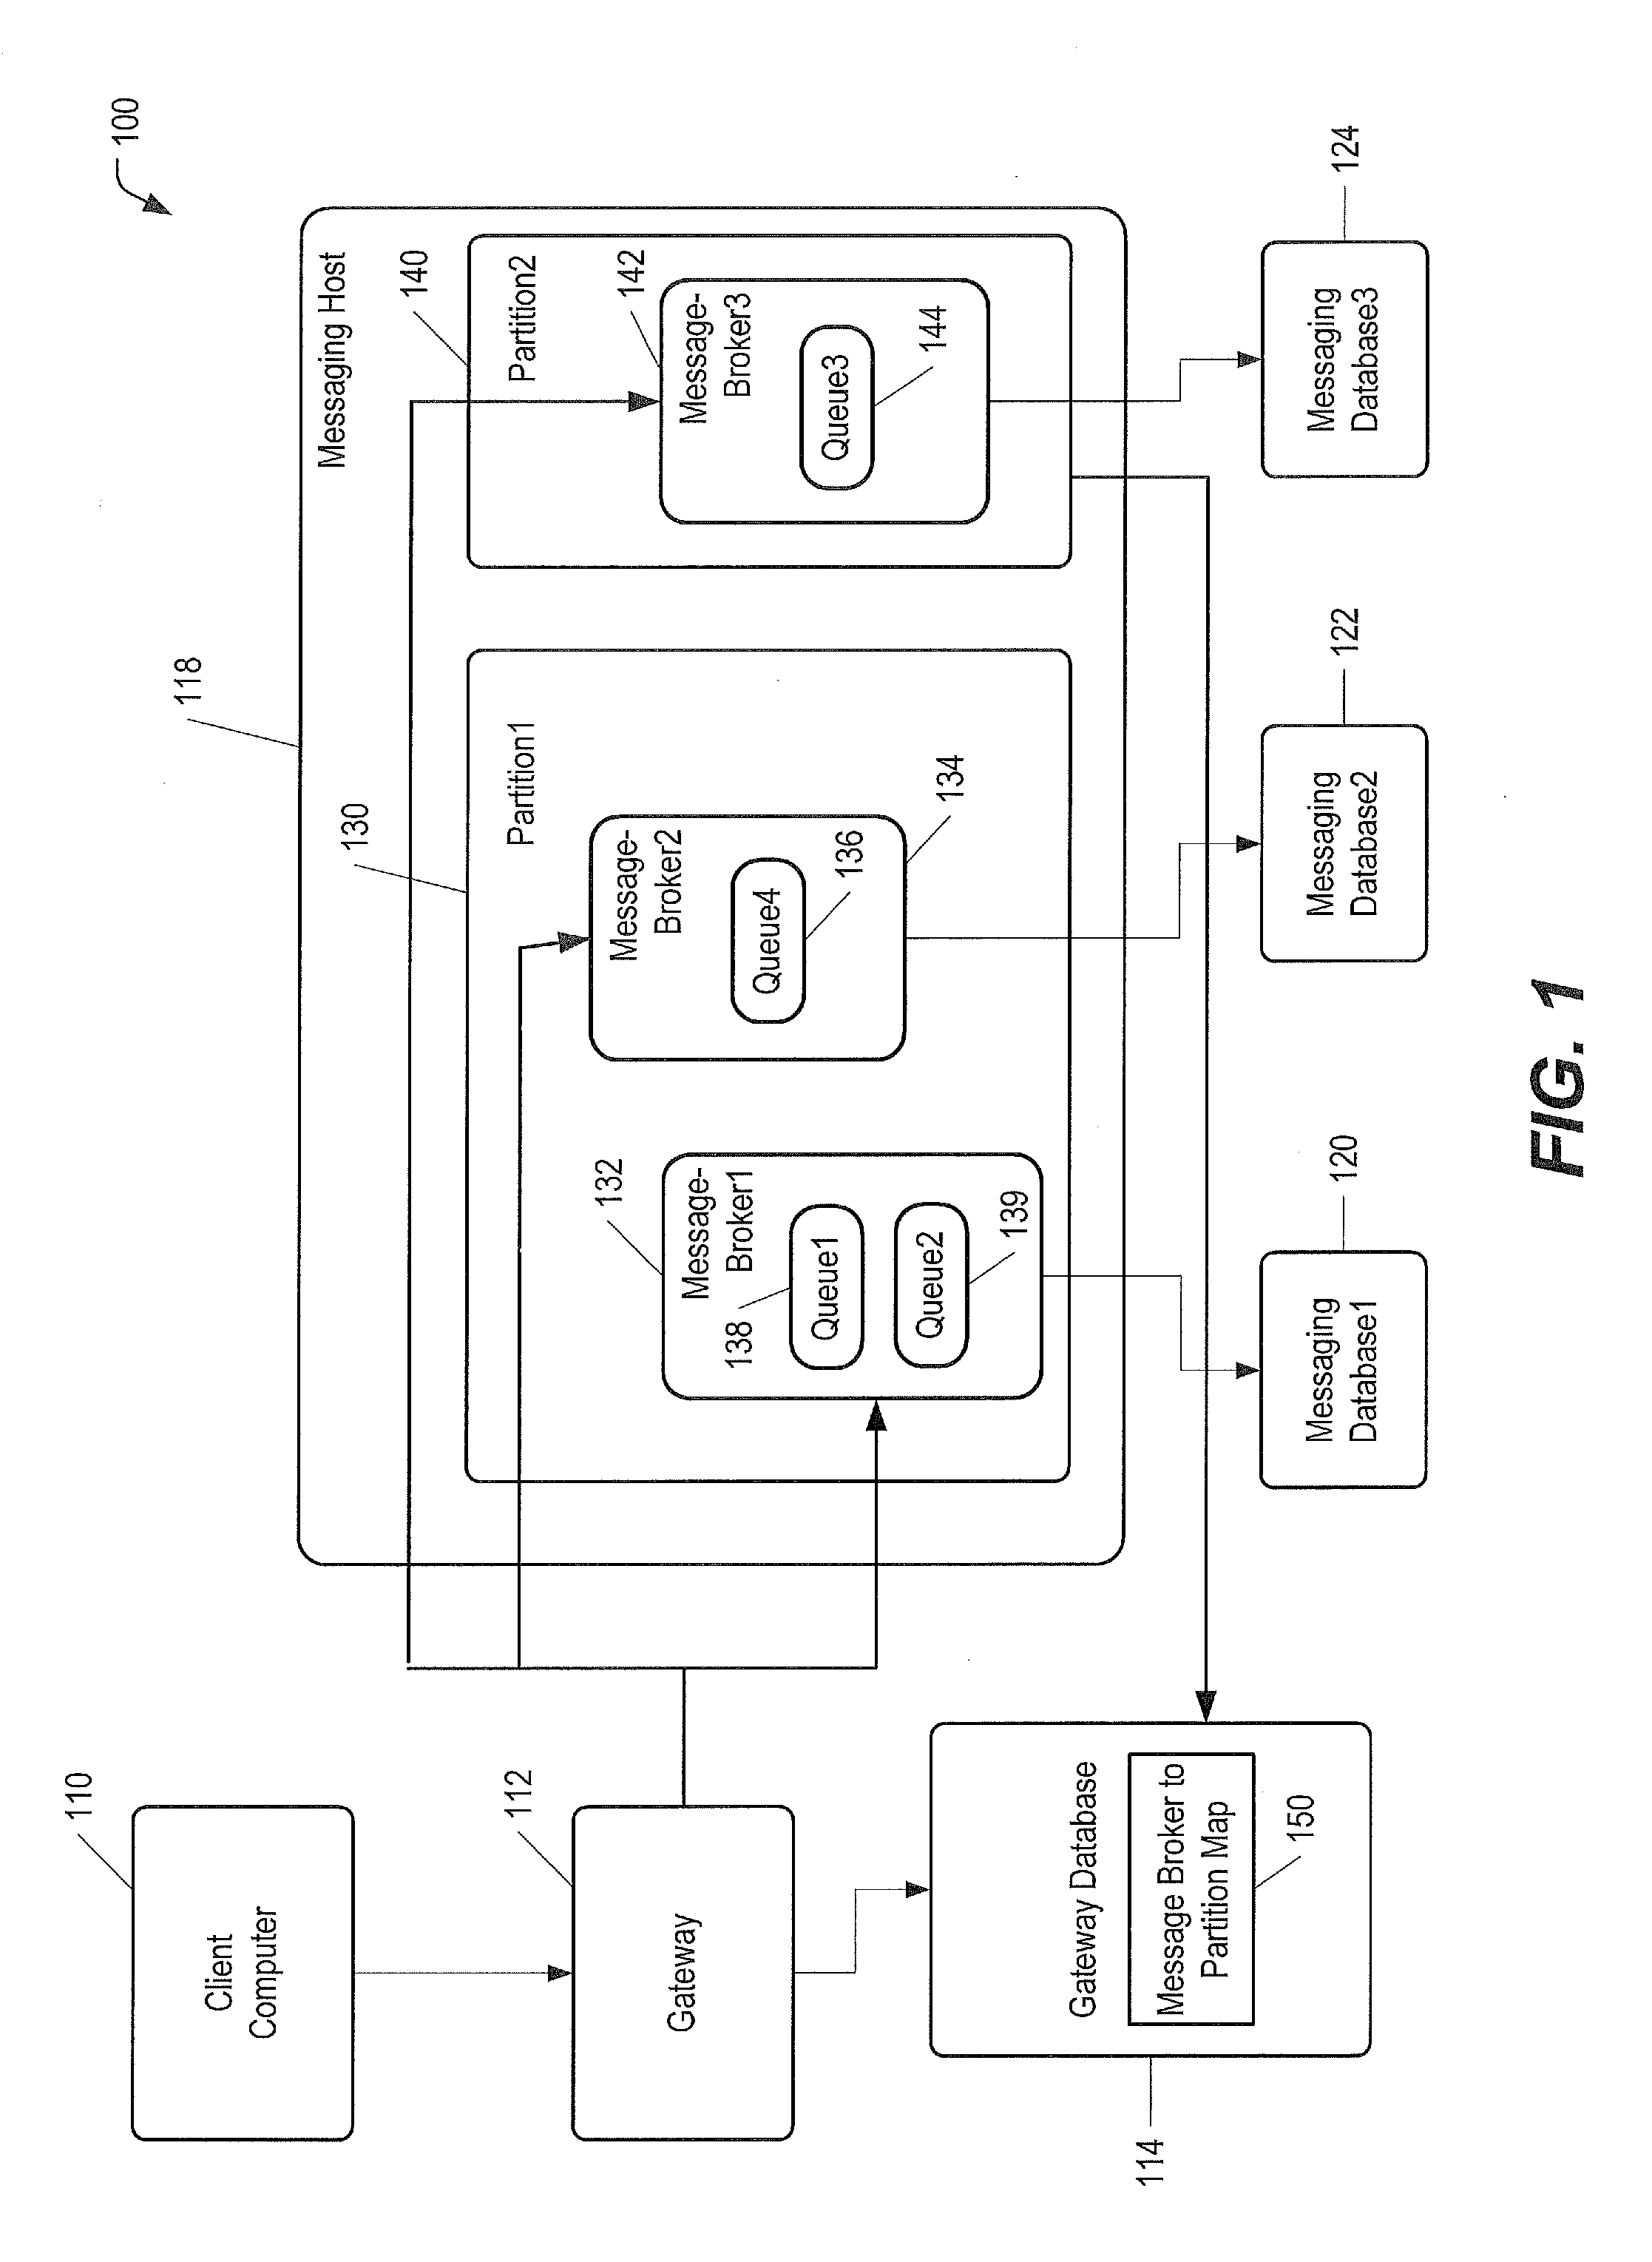 Distributed messaging system connectivity and resource management